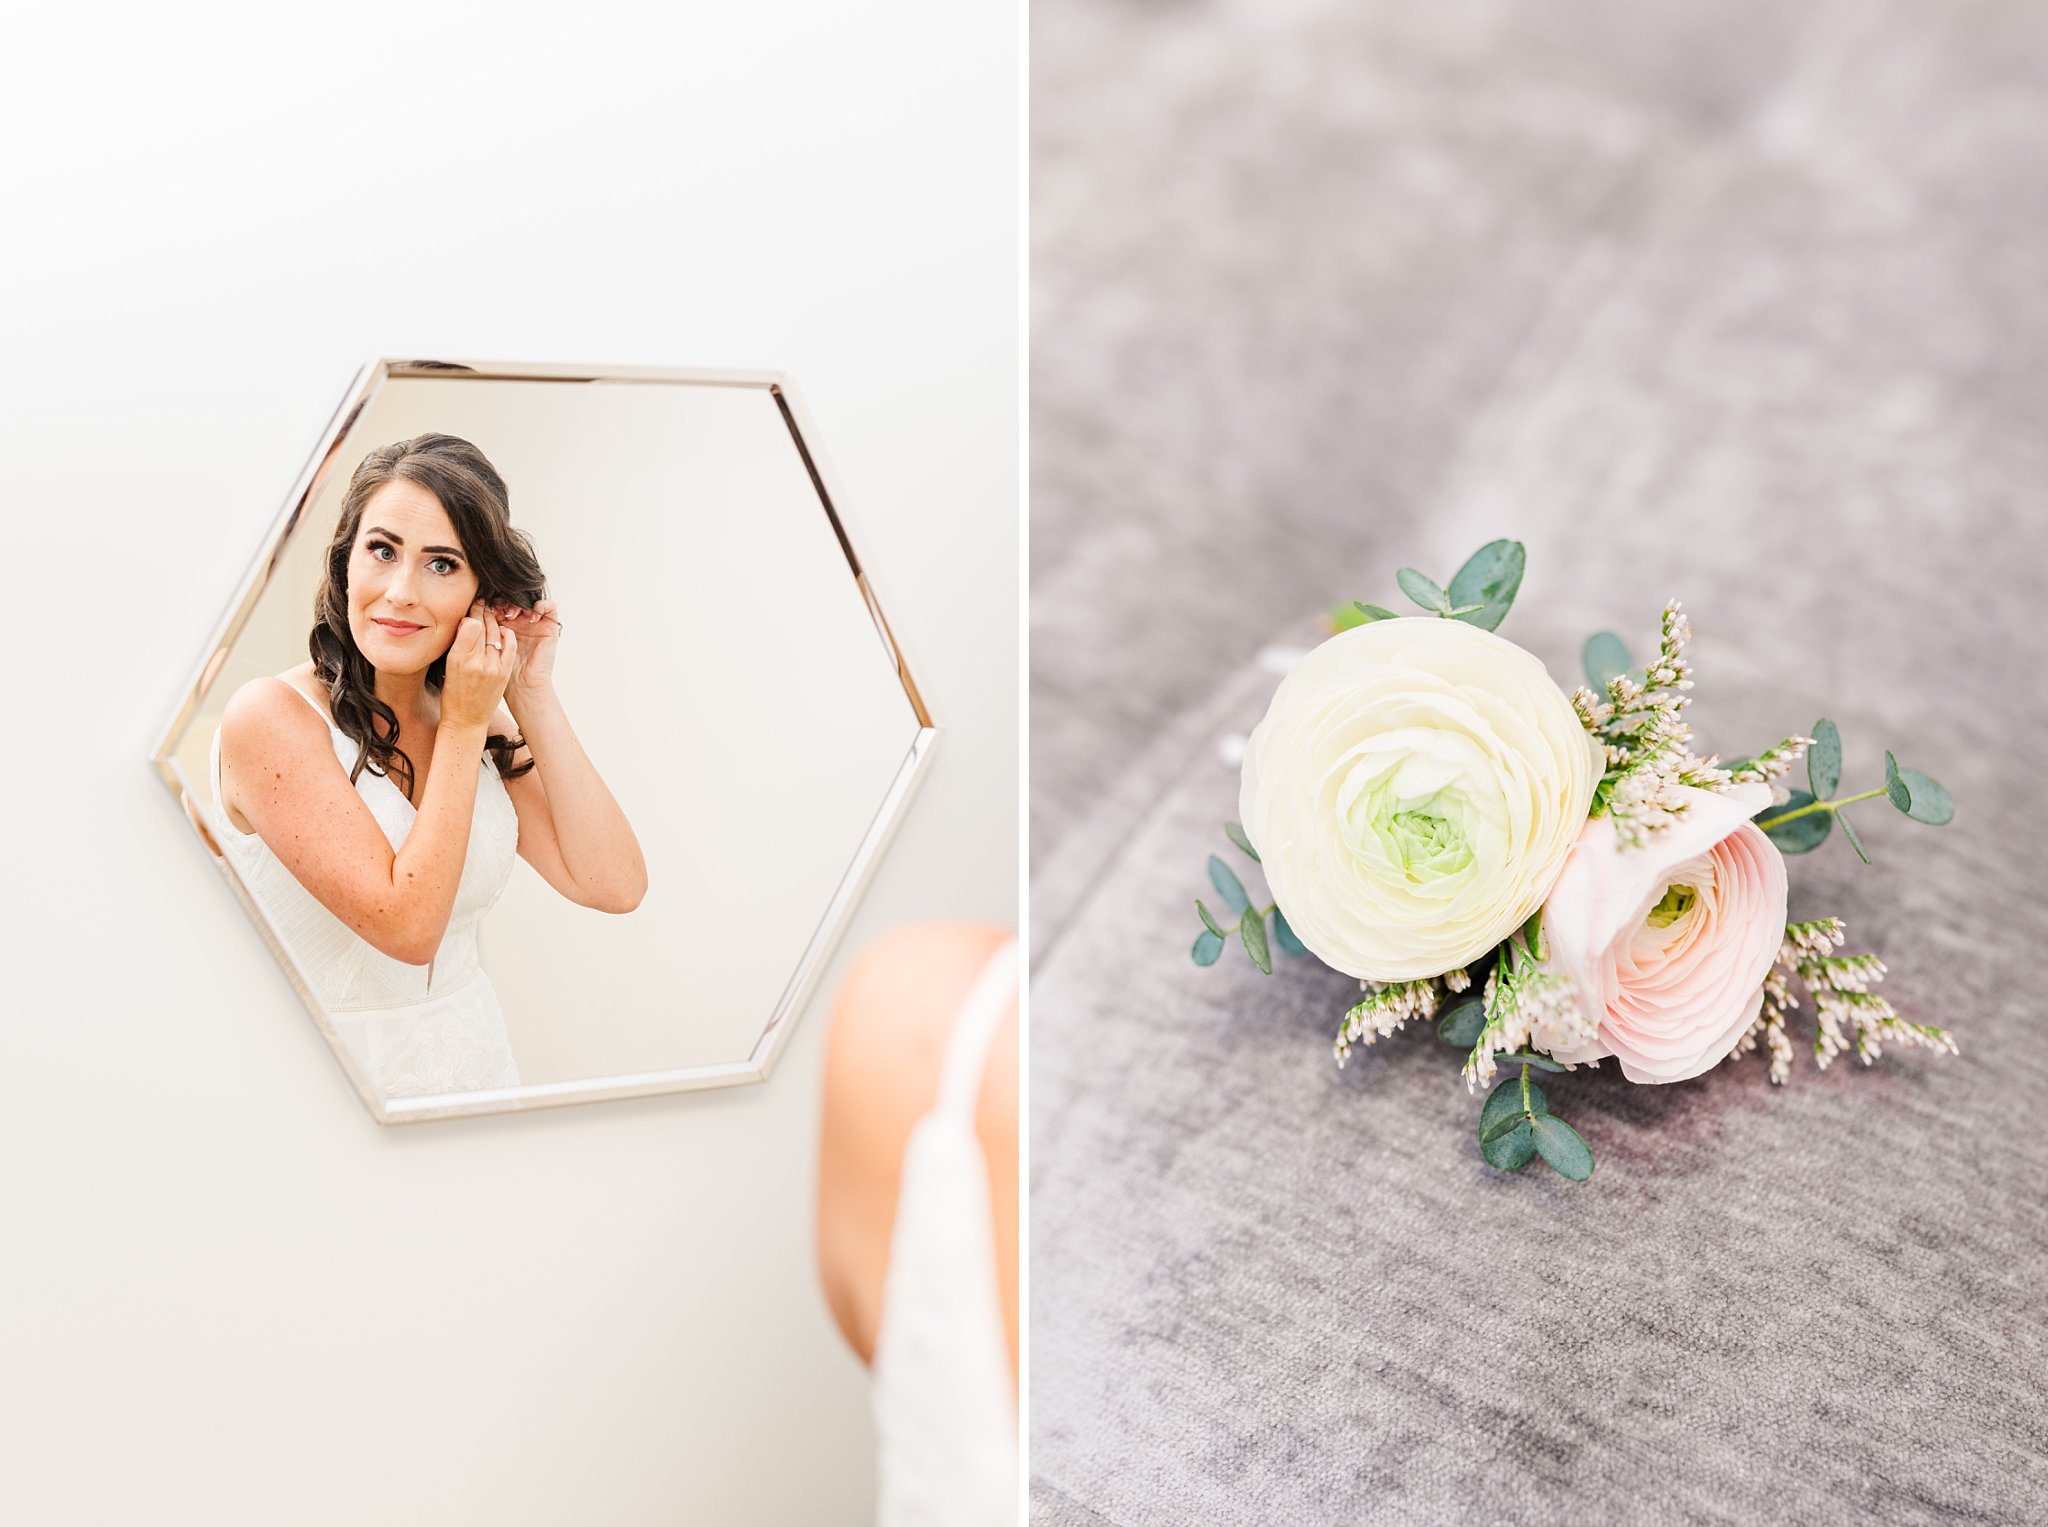 a bride puts an earring in while looking in a hexagon shaped mirror